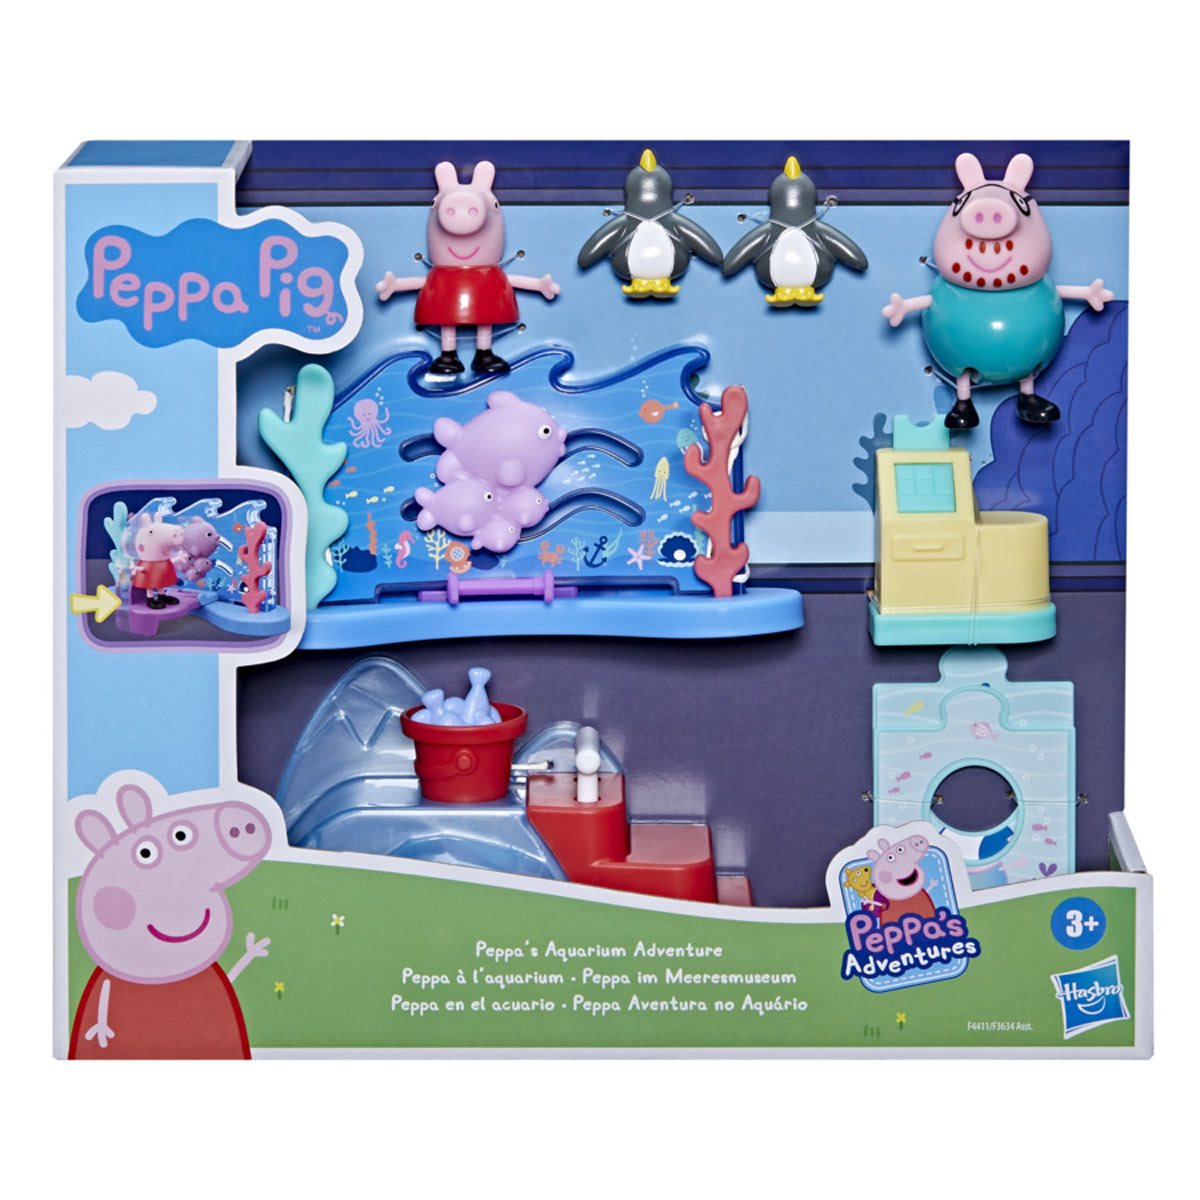 Peppa Pig Kids 3 Pc. Adventure Kit, Science & Discovery, Baby & Toys